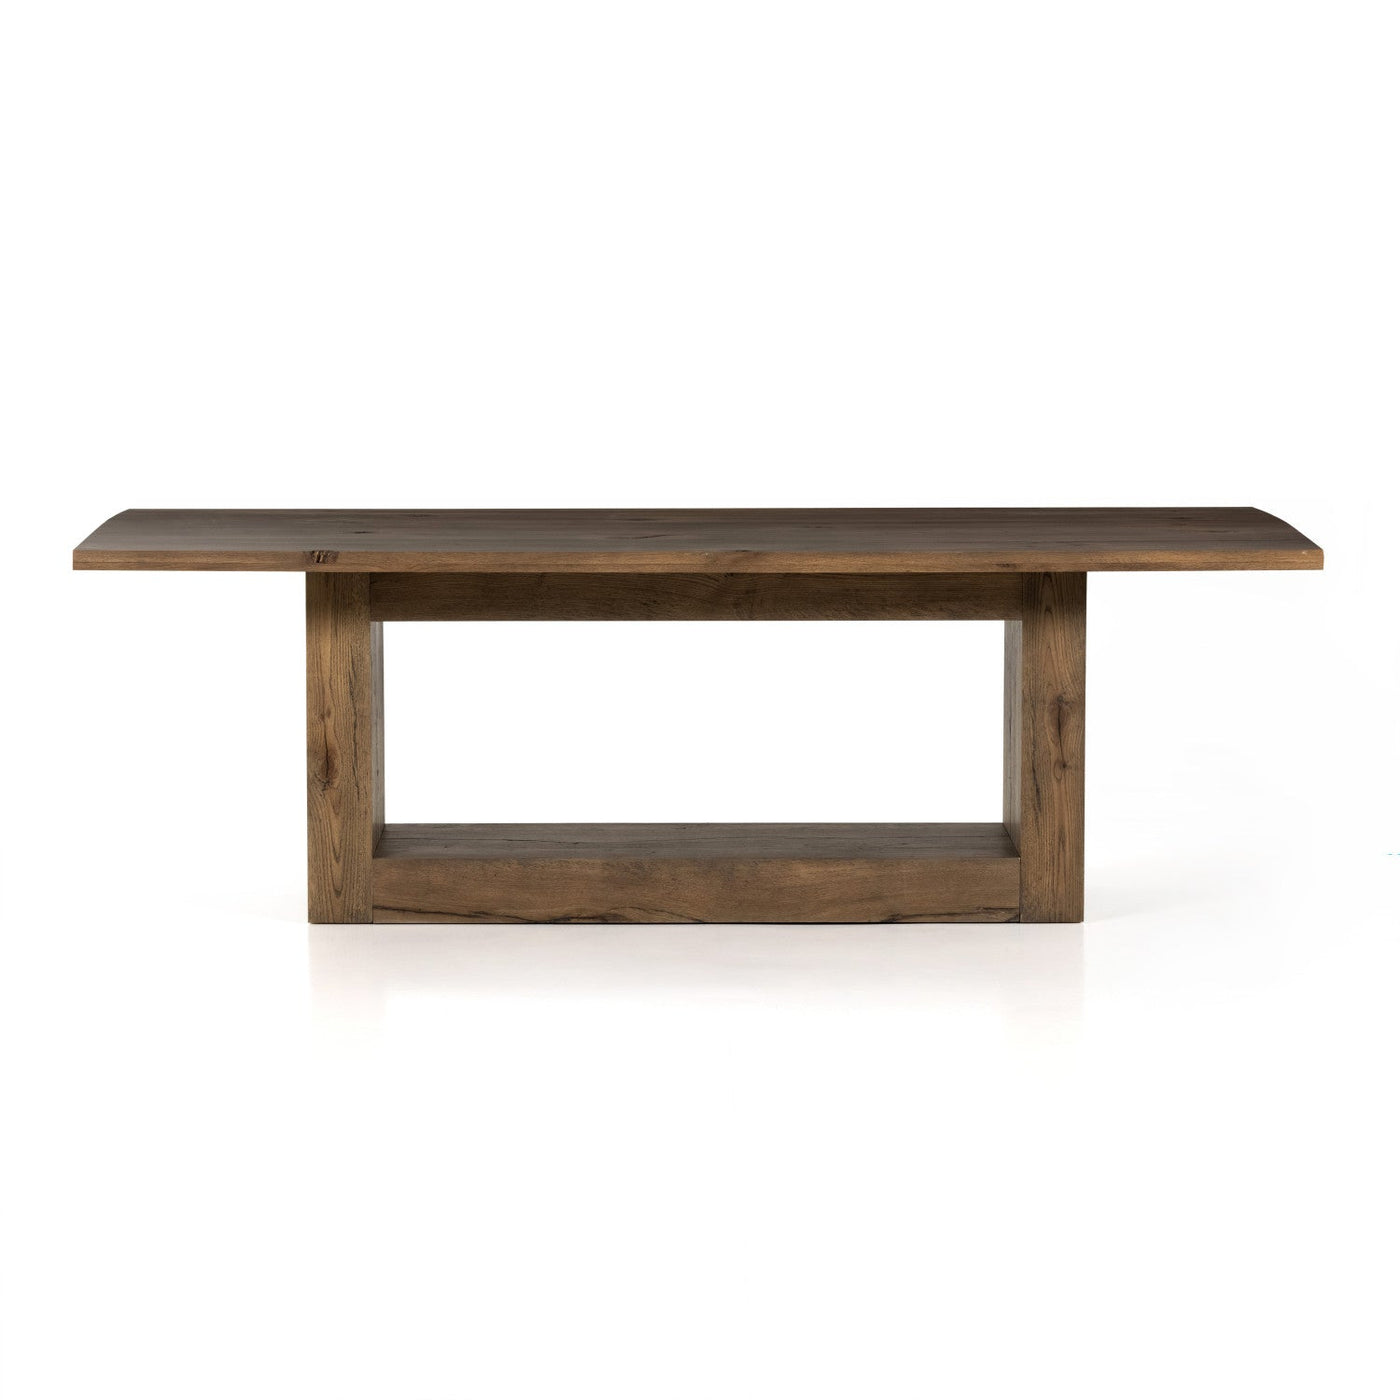 PERRIN DINING TABLE 93-RUSTIC FAWN